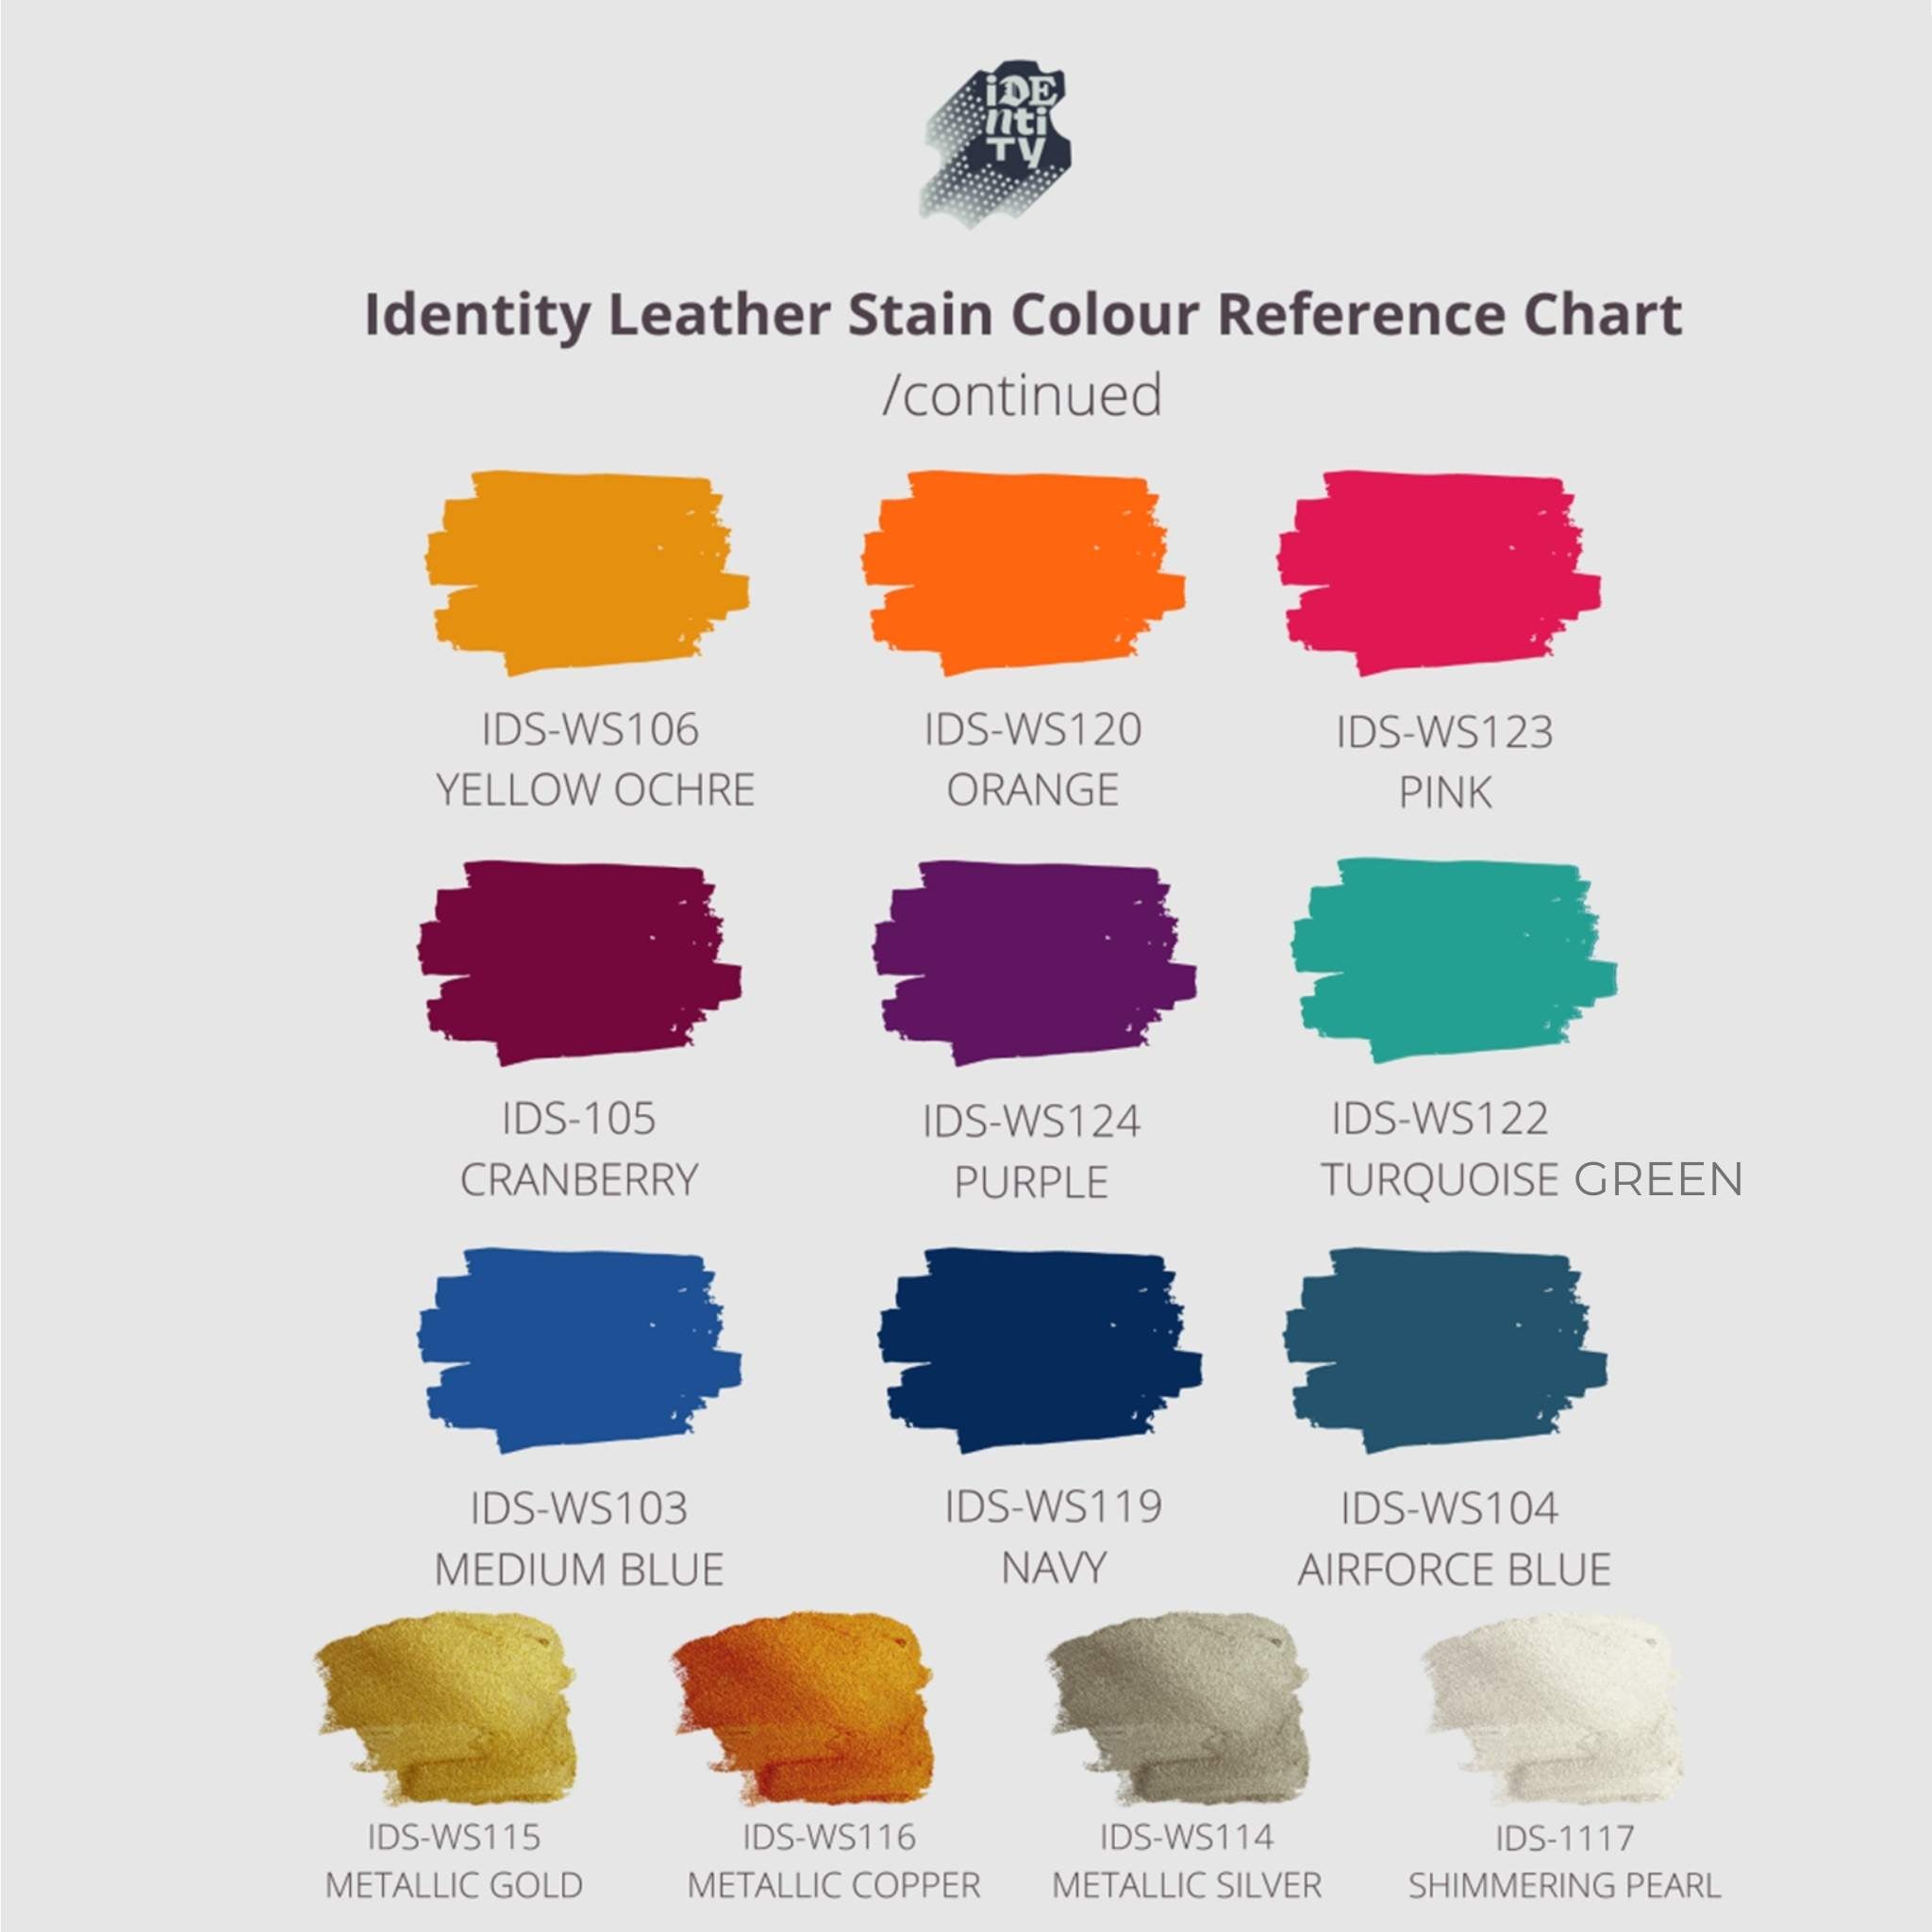 Water Based Leather Stains from Identity Leathercraft - Colour Chart Page 2